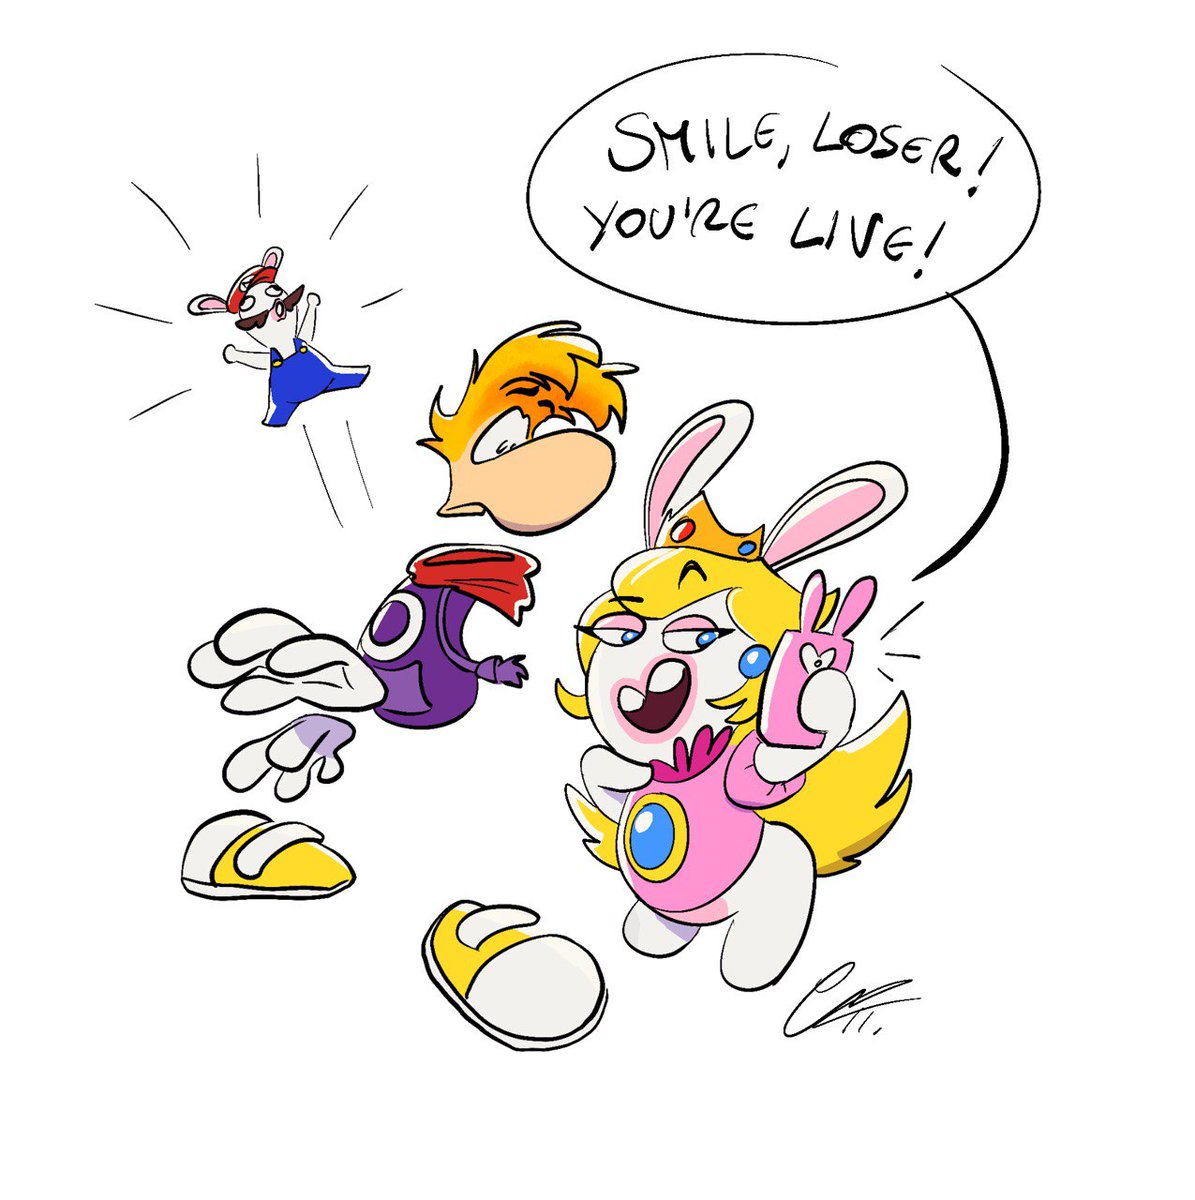 HYPE HYPE HYPE💛❤️💜#Rayman #MarioRabbidsSparksofHope